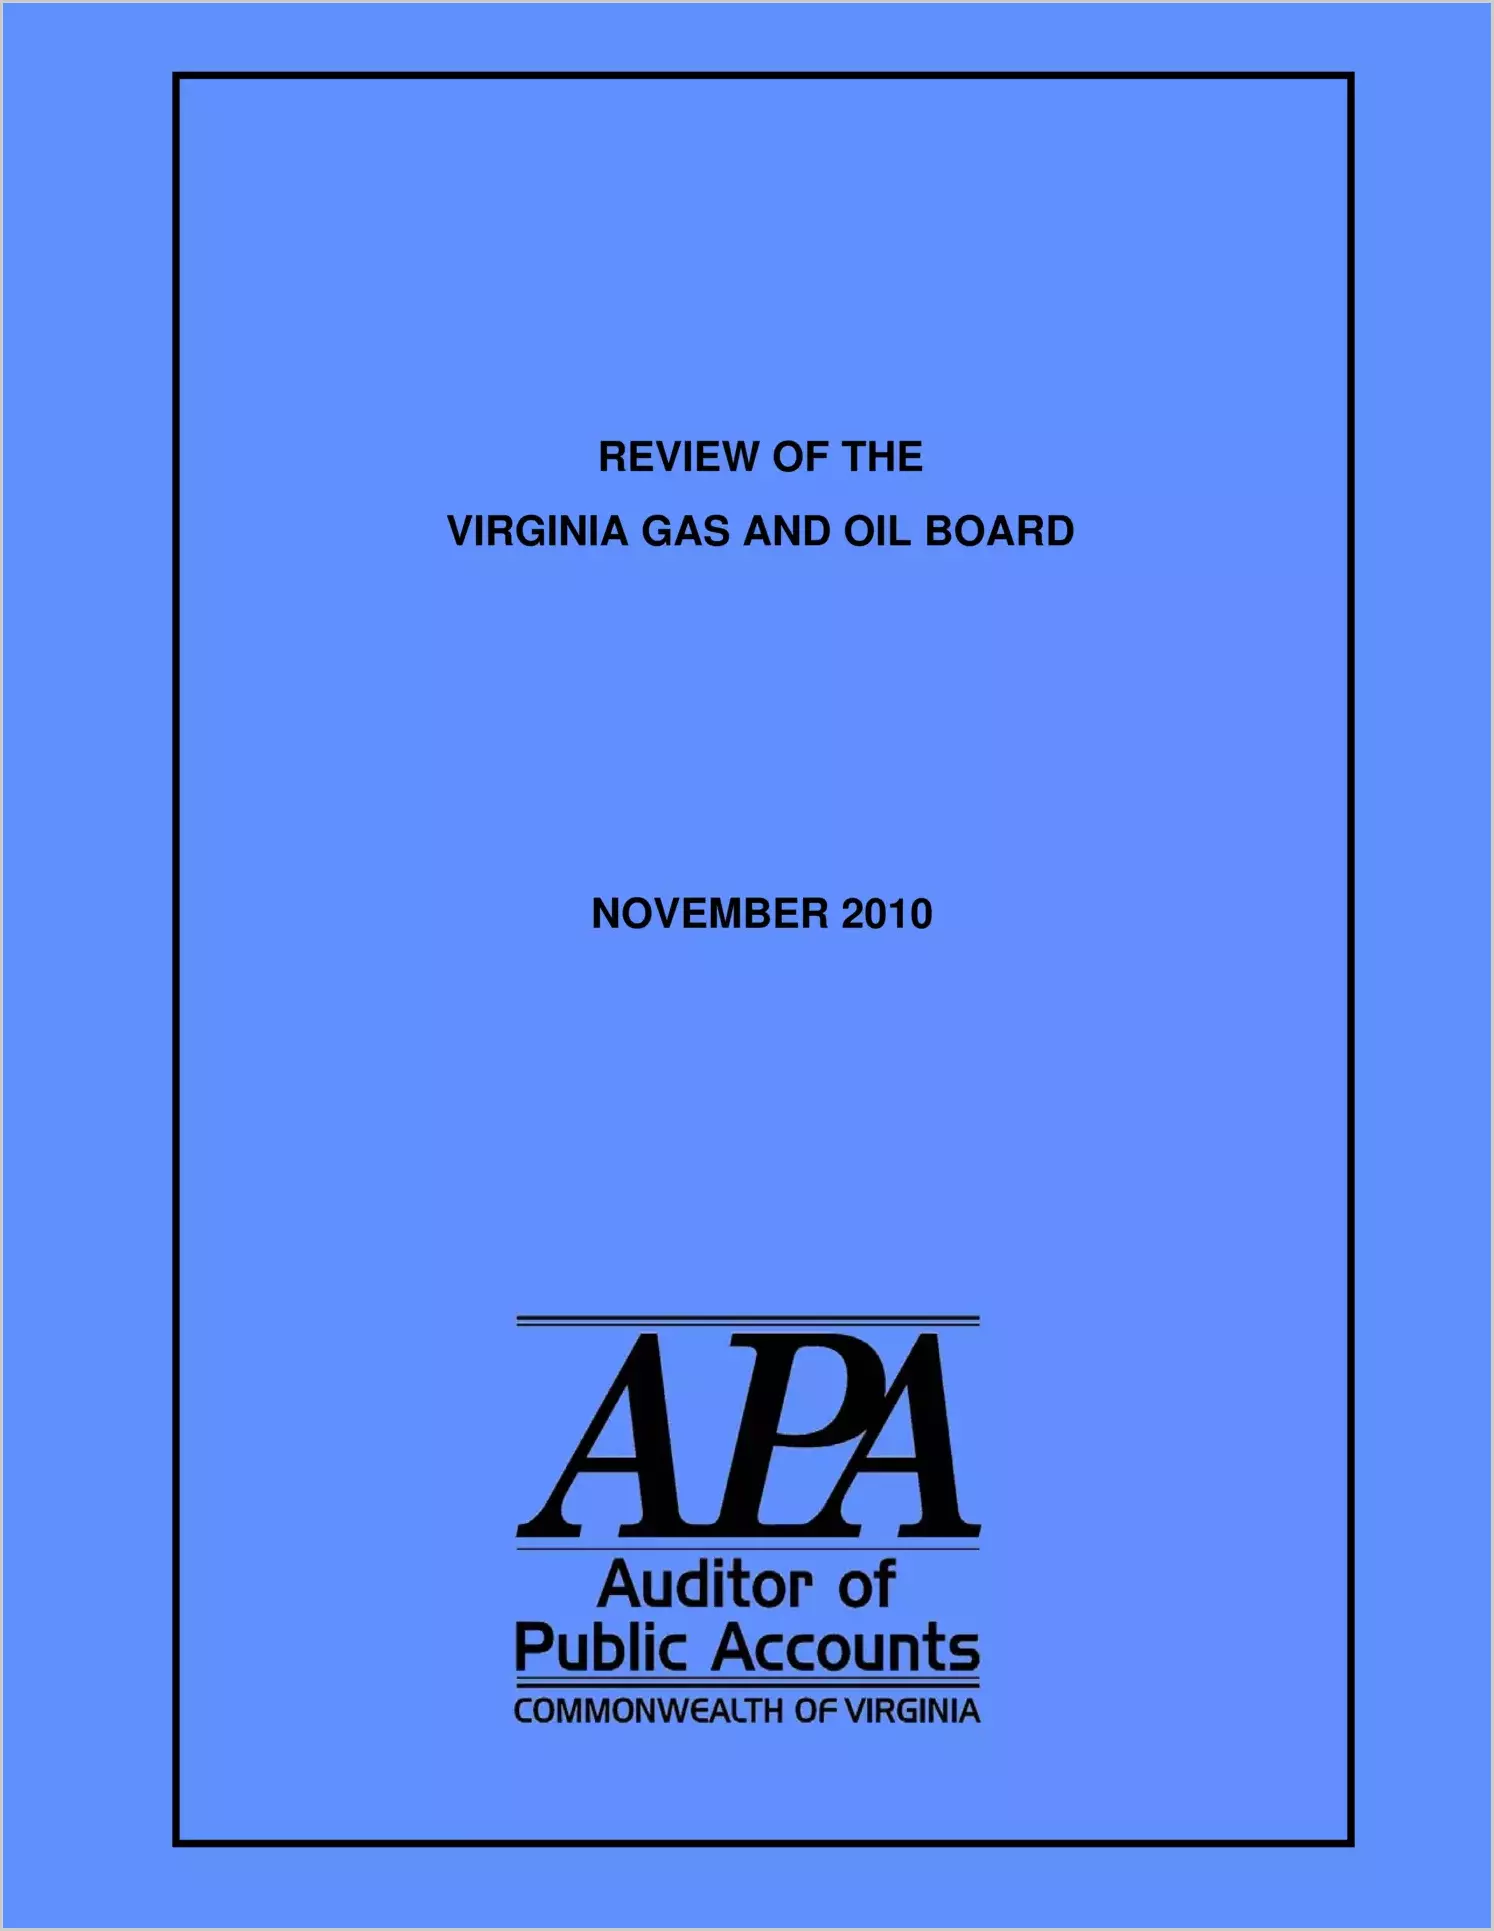 Virginia Gas and Oil Board (Board) policies and procedures for maintaining escrow accounts with industry best practices - November 2010